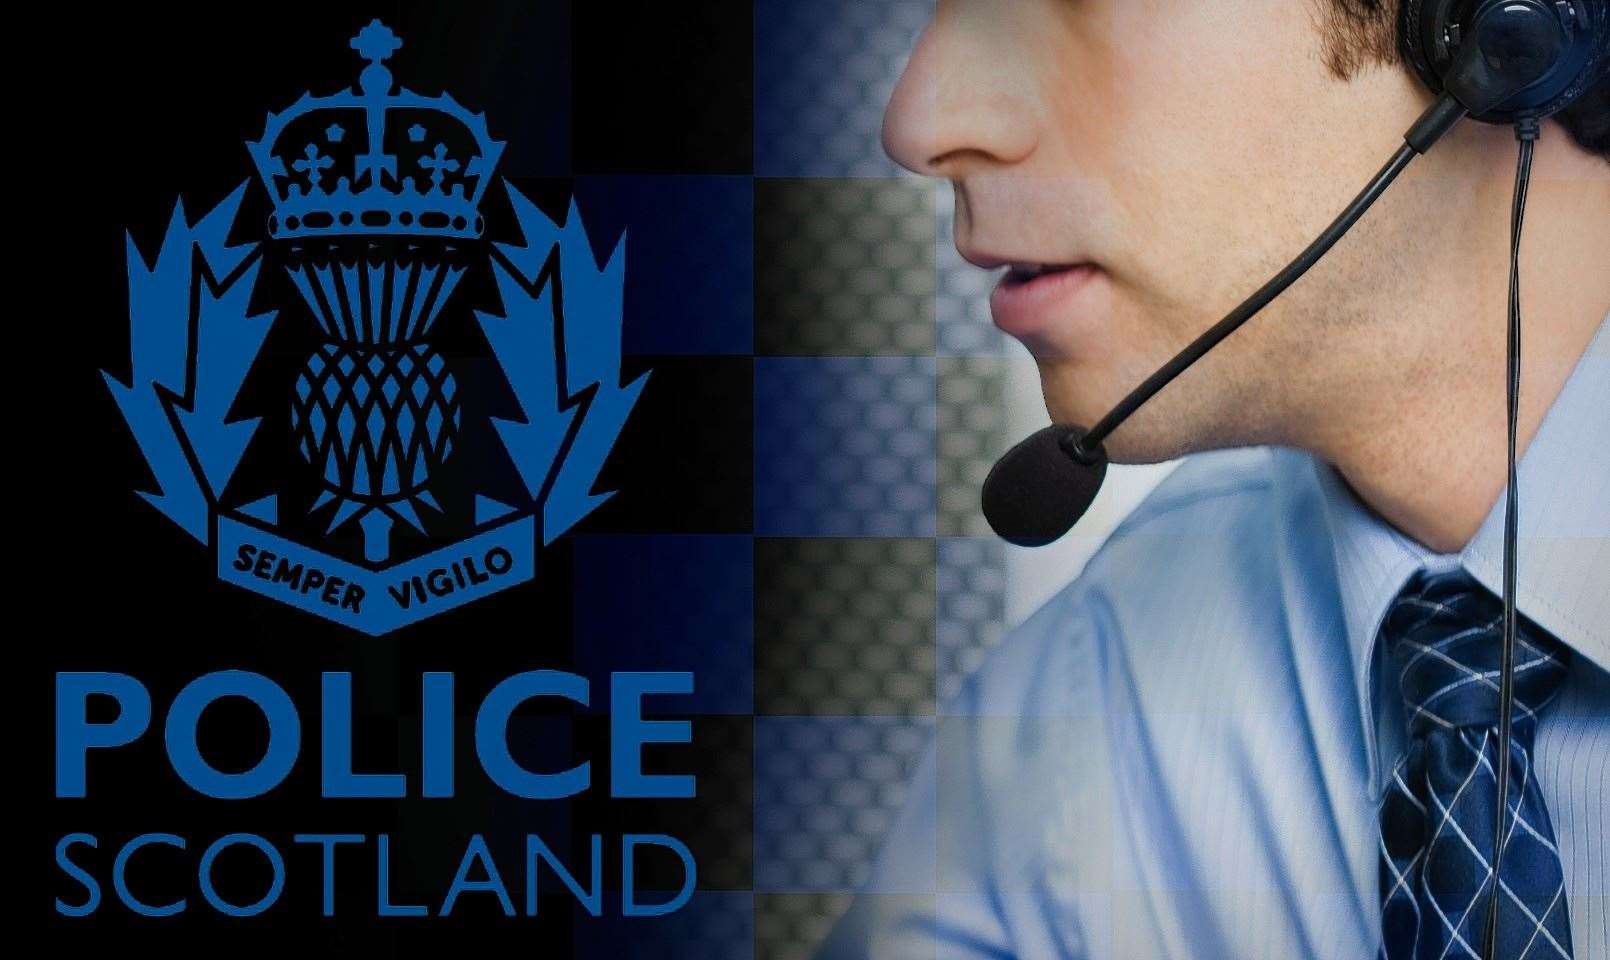 Police Scotland are still appealing for information following the death of David Anderson.